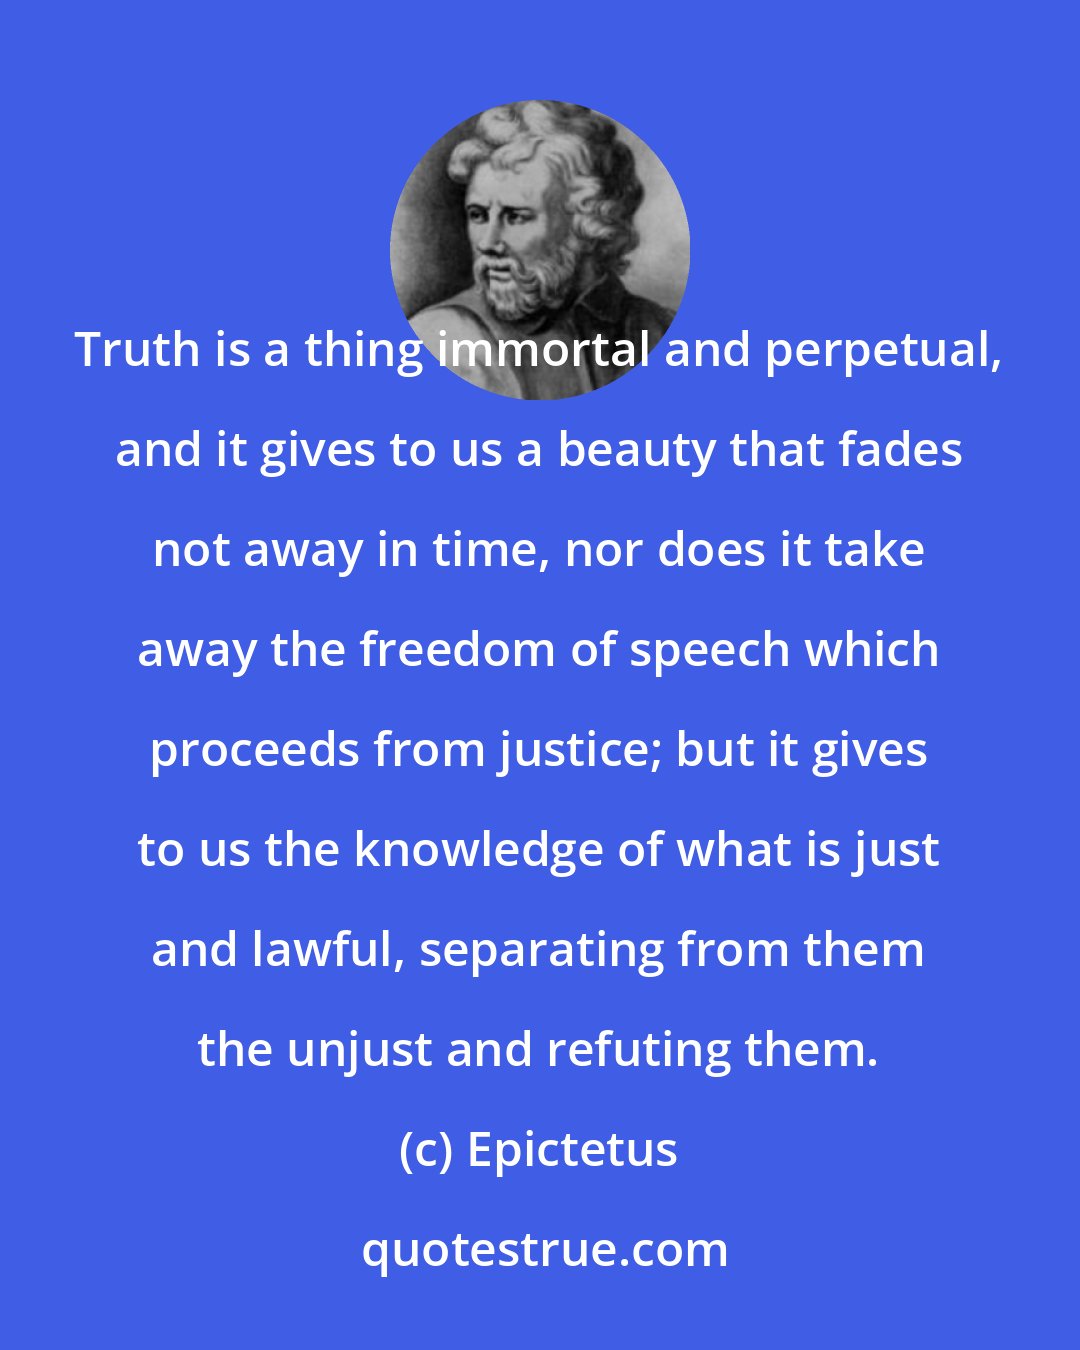 Epictetus: Truth is a thing immortal and perpetual, and it gives to us a beauty that fades not away in time, nor does it take away the freedom of speech which proceeds from justice; but it gives to us the knowledge of what is just and lawful, separating from them the unjust and refuting them.